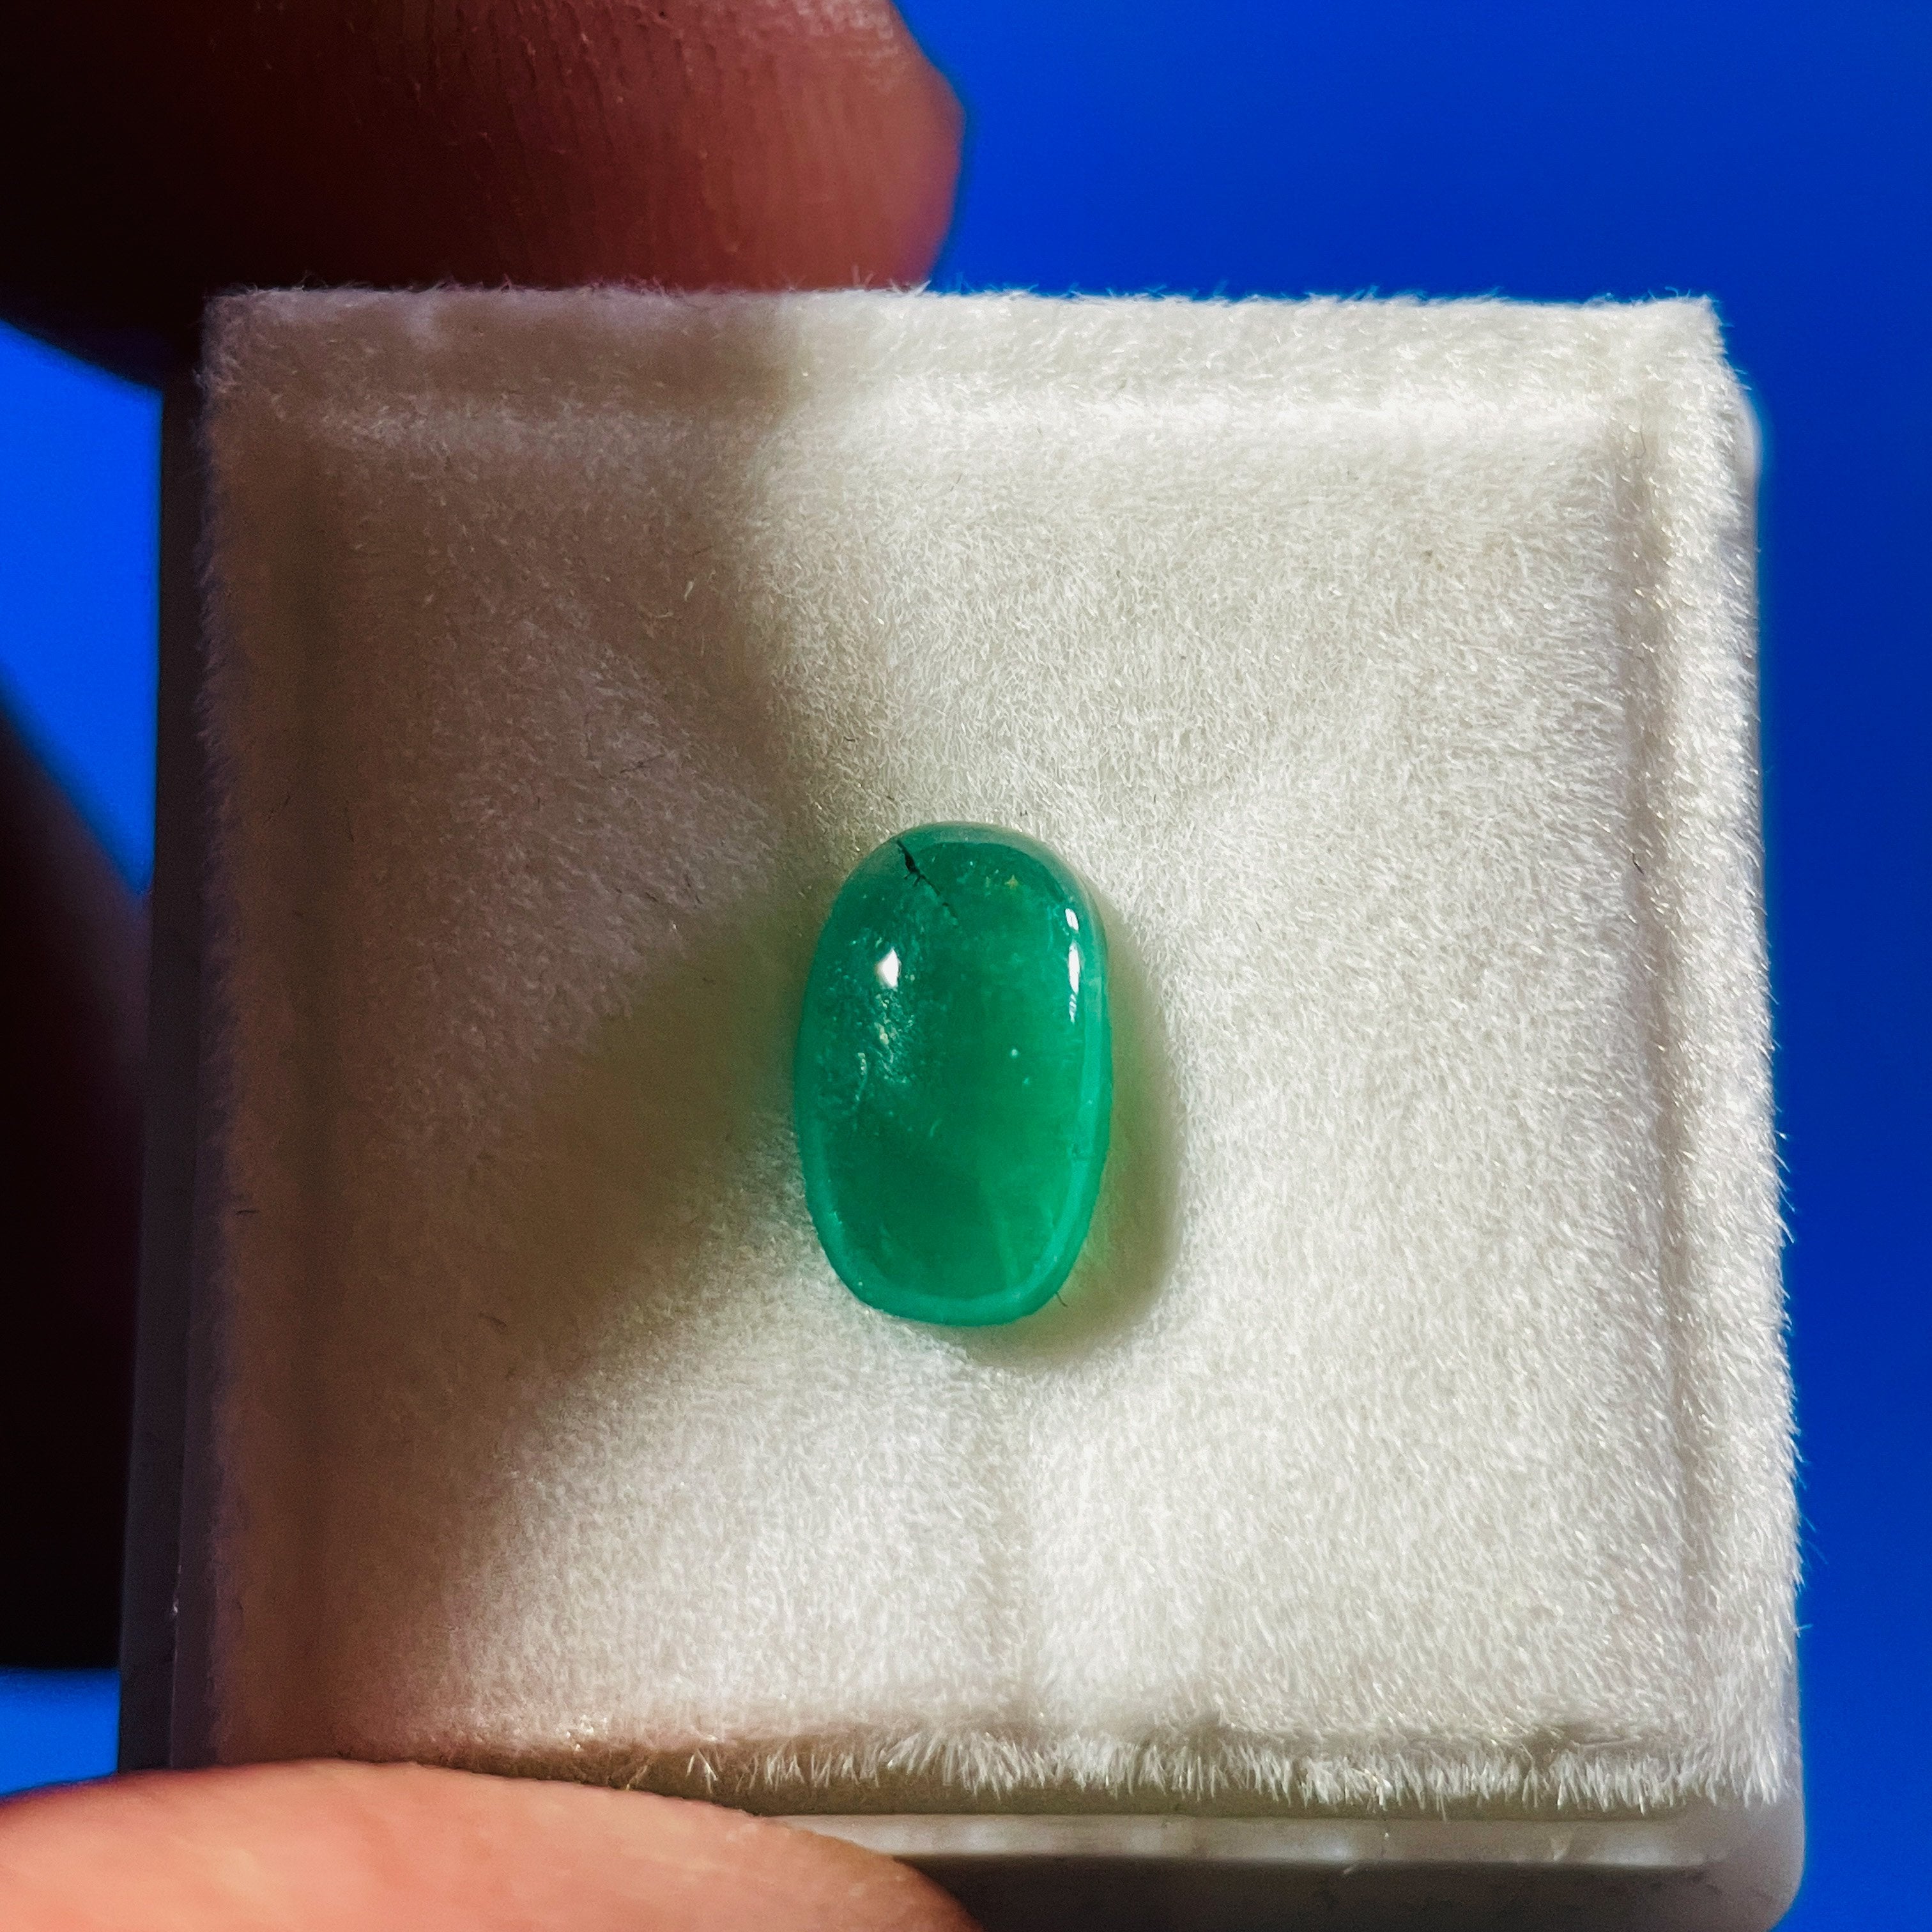 0.87Ct Emerald Tanzania No Oil Added But Some Labs May Describe The Stone As Minor Oil Or